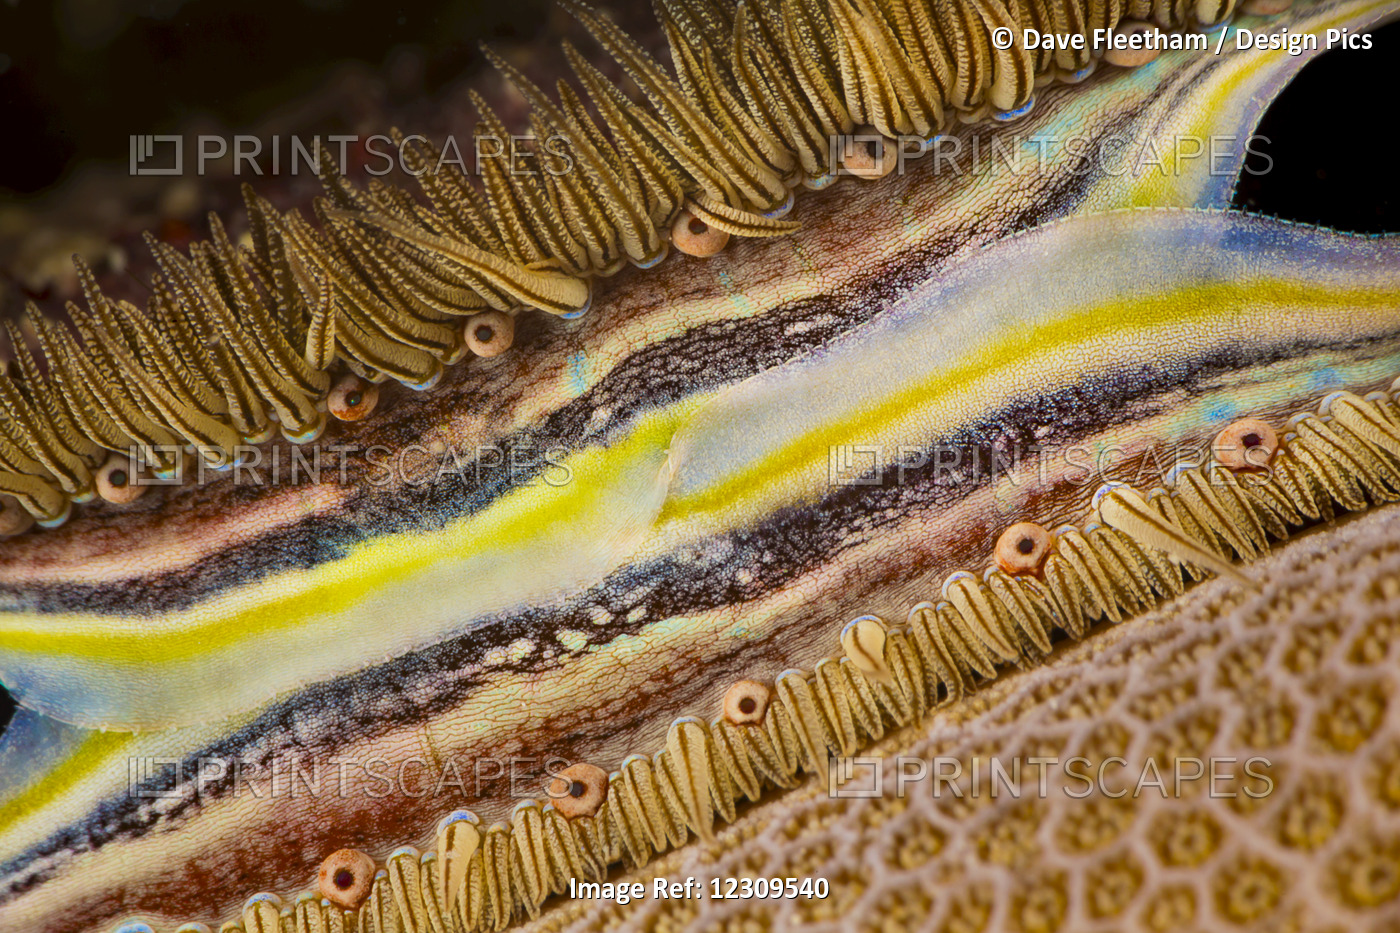 The Brightly Colored Mantle And Rows Of Tiny Eyes Make The Coral-Boring Scallop ...